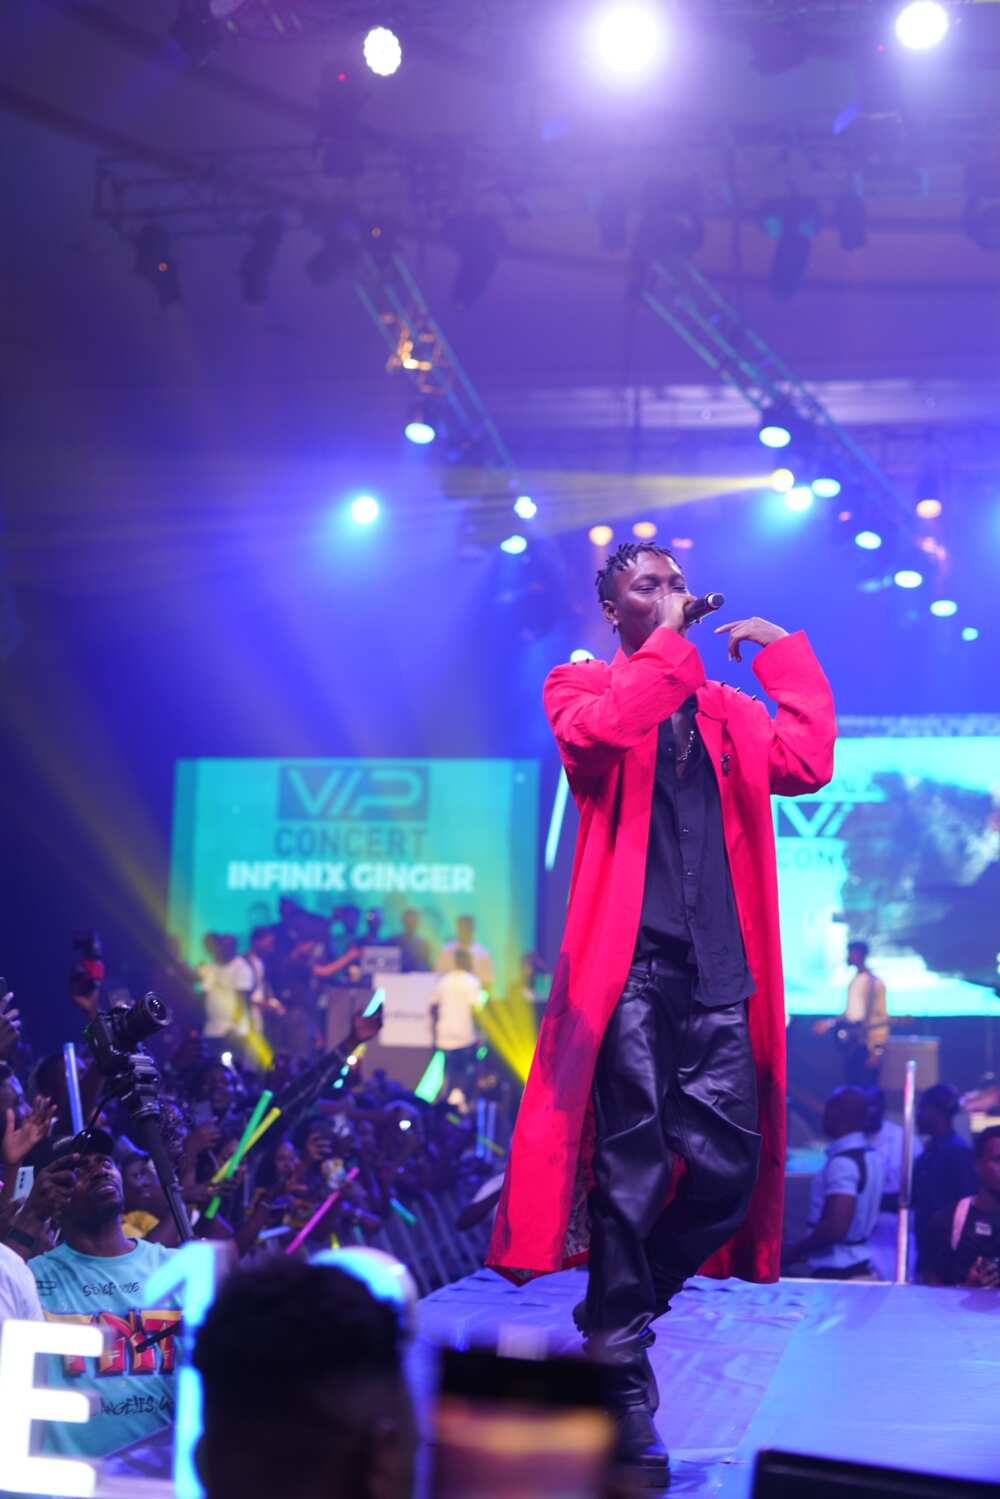 Infinix VIP Concert with Davido was Truly an Extraordinary Experience